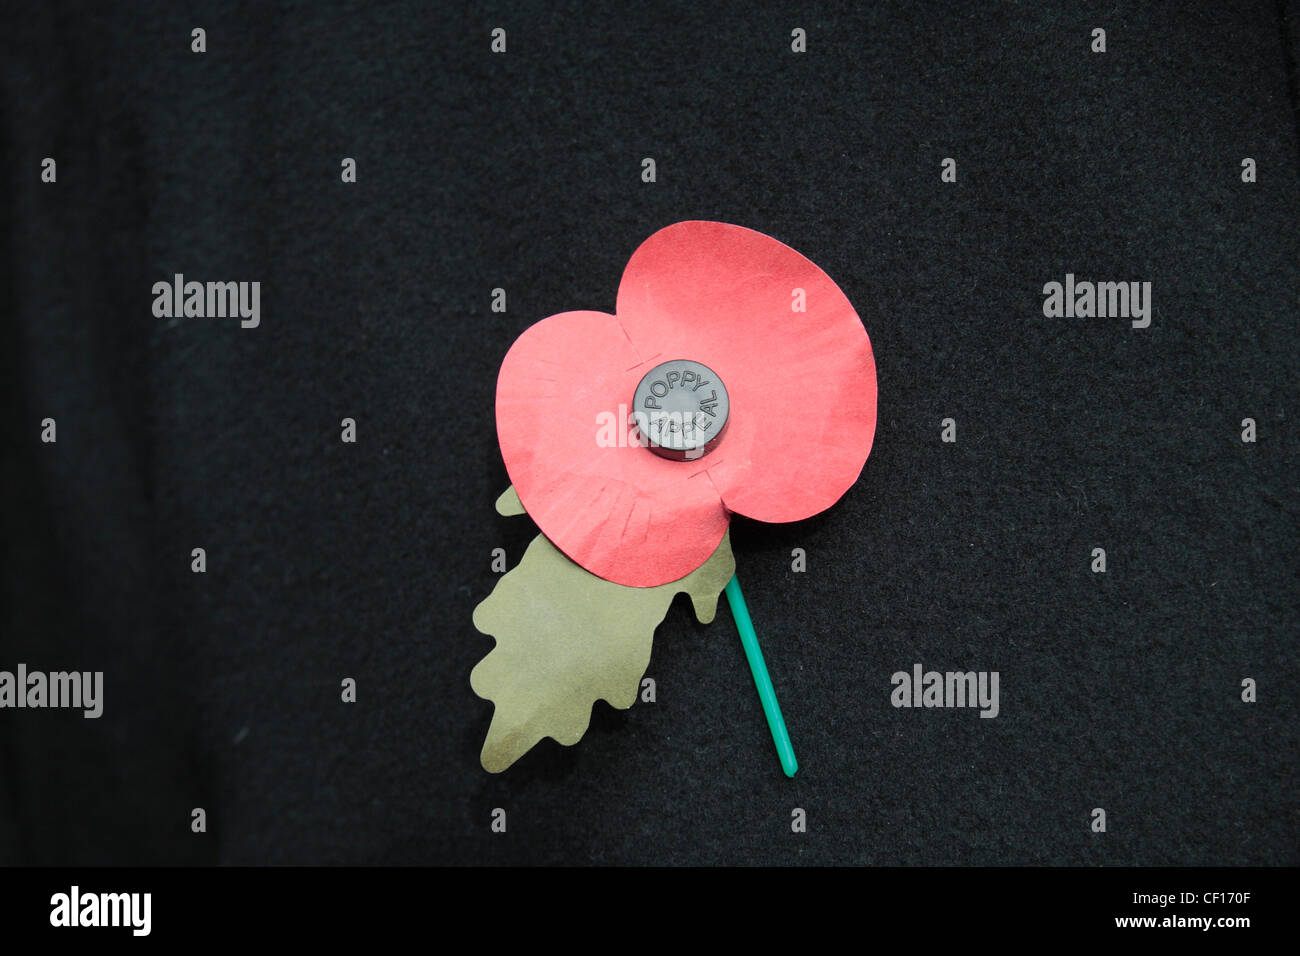 An English artificial Royal British Legion Red Poppy on a dark jacket background.  This shows the green leaf pointing down.(6am) Stock Photo